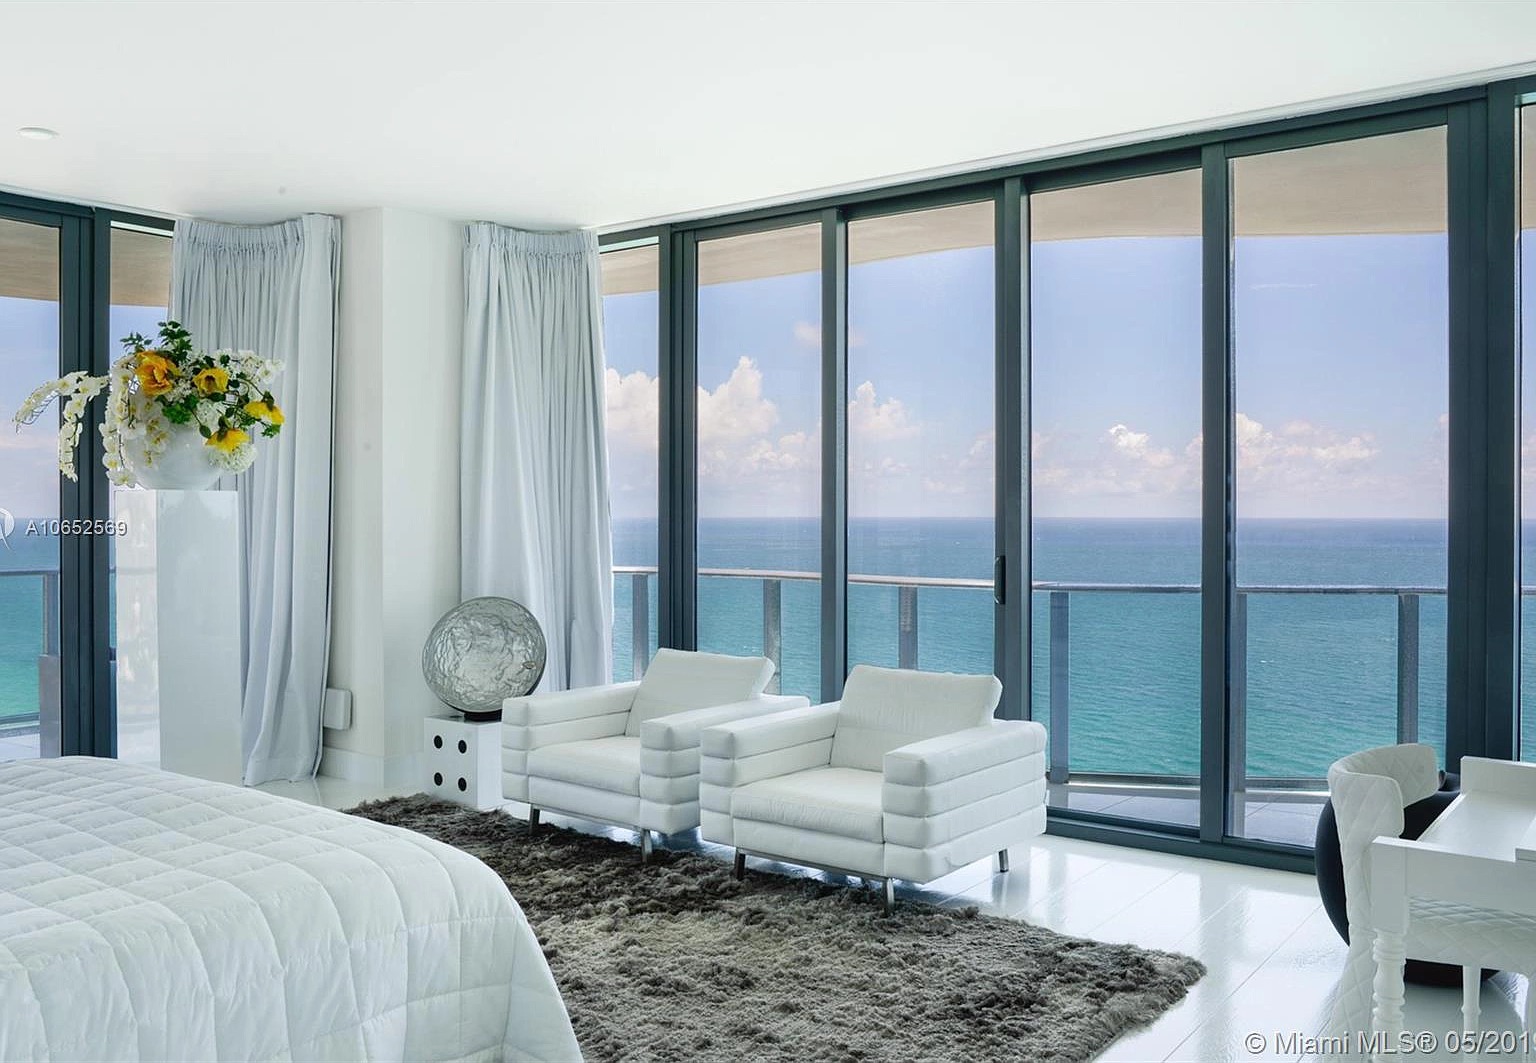 19575 Collins Ave UNIT 30, Sunny Isles Beach, FL 33160 - $15,000,000 home for sale, house images, photos and pics gallery